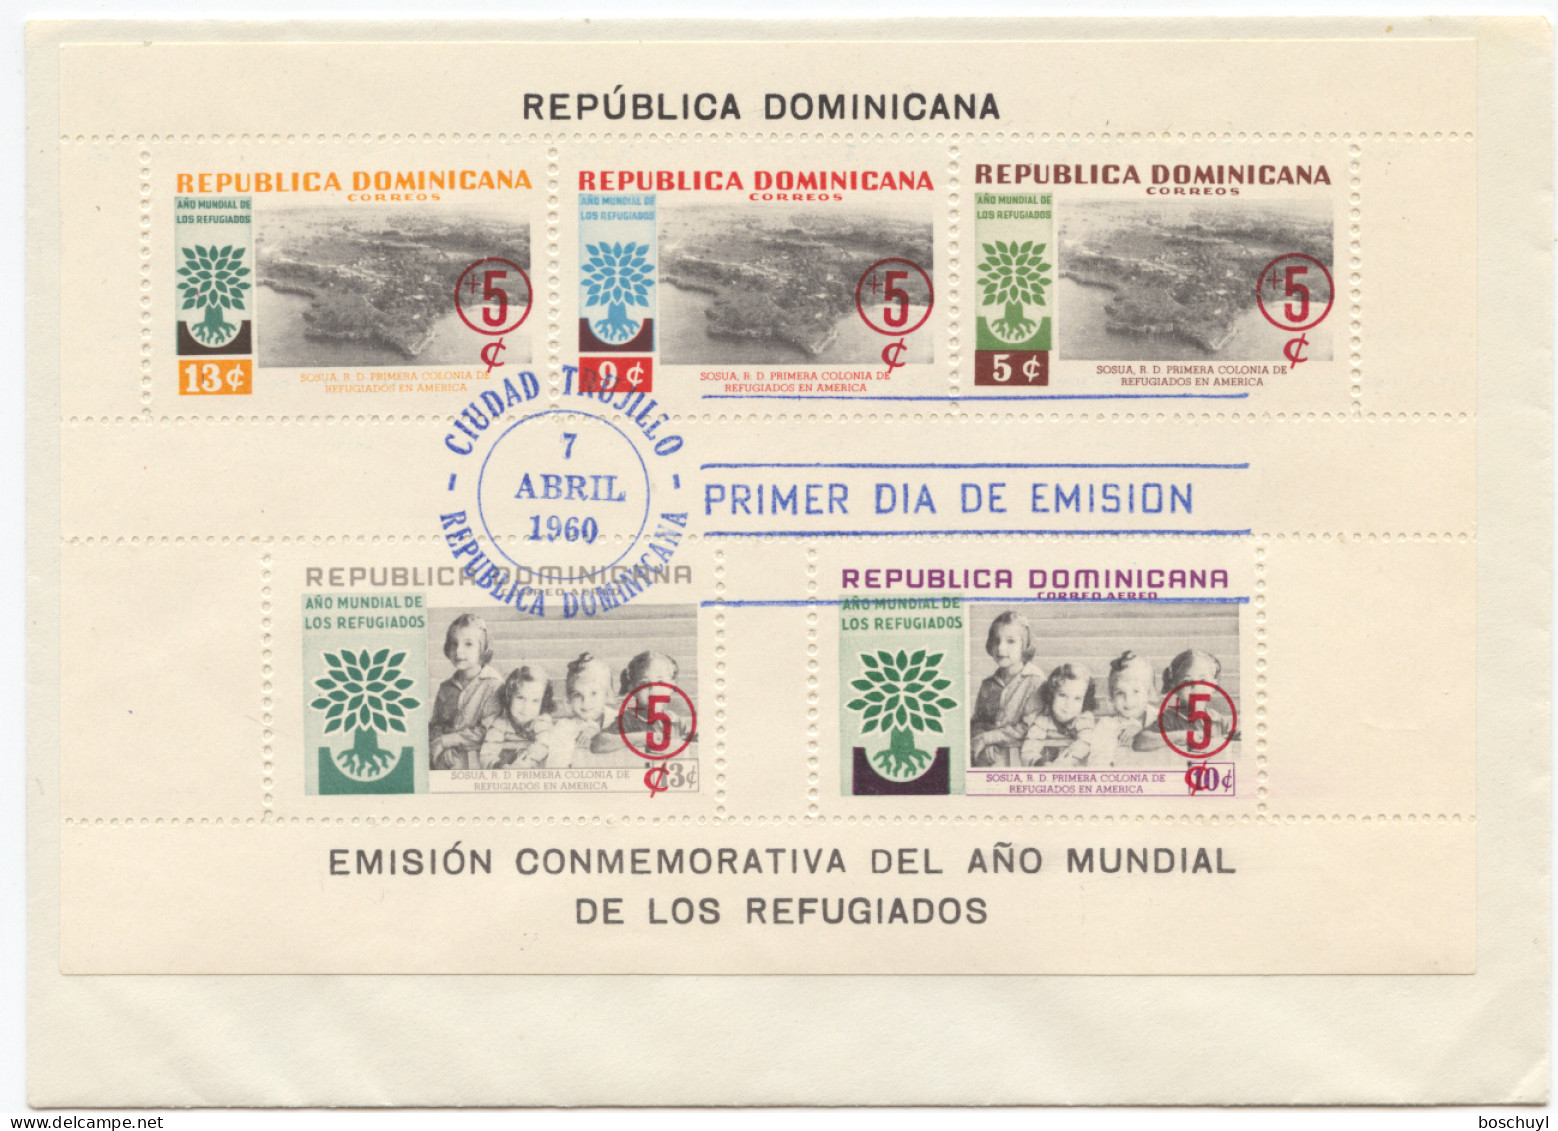 Dominican Republic, 1960, World Refugee Year, WRY, United Nations, Overprinted, On Cover, FD Cancelled, Michel Block 24A - Vluchtelingen